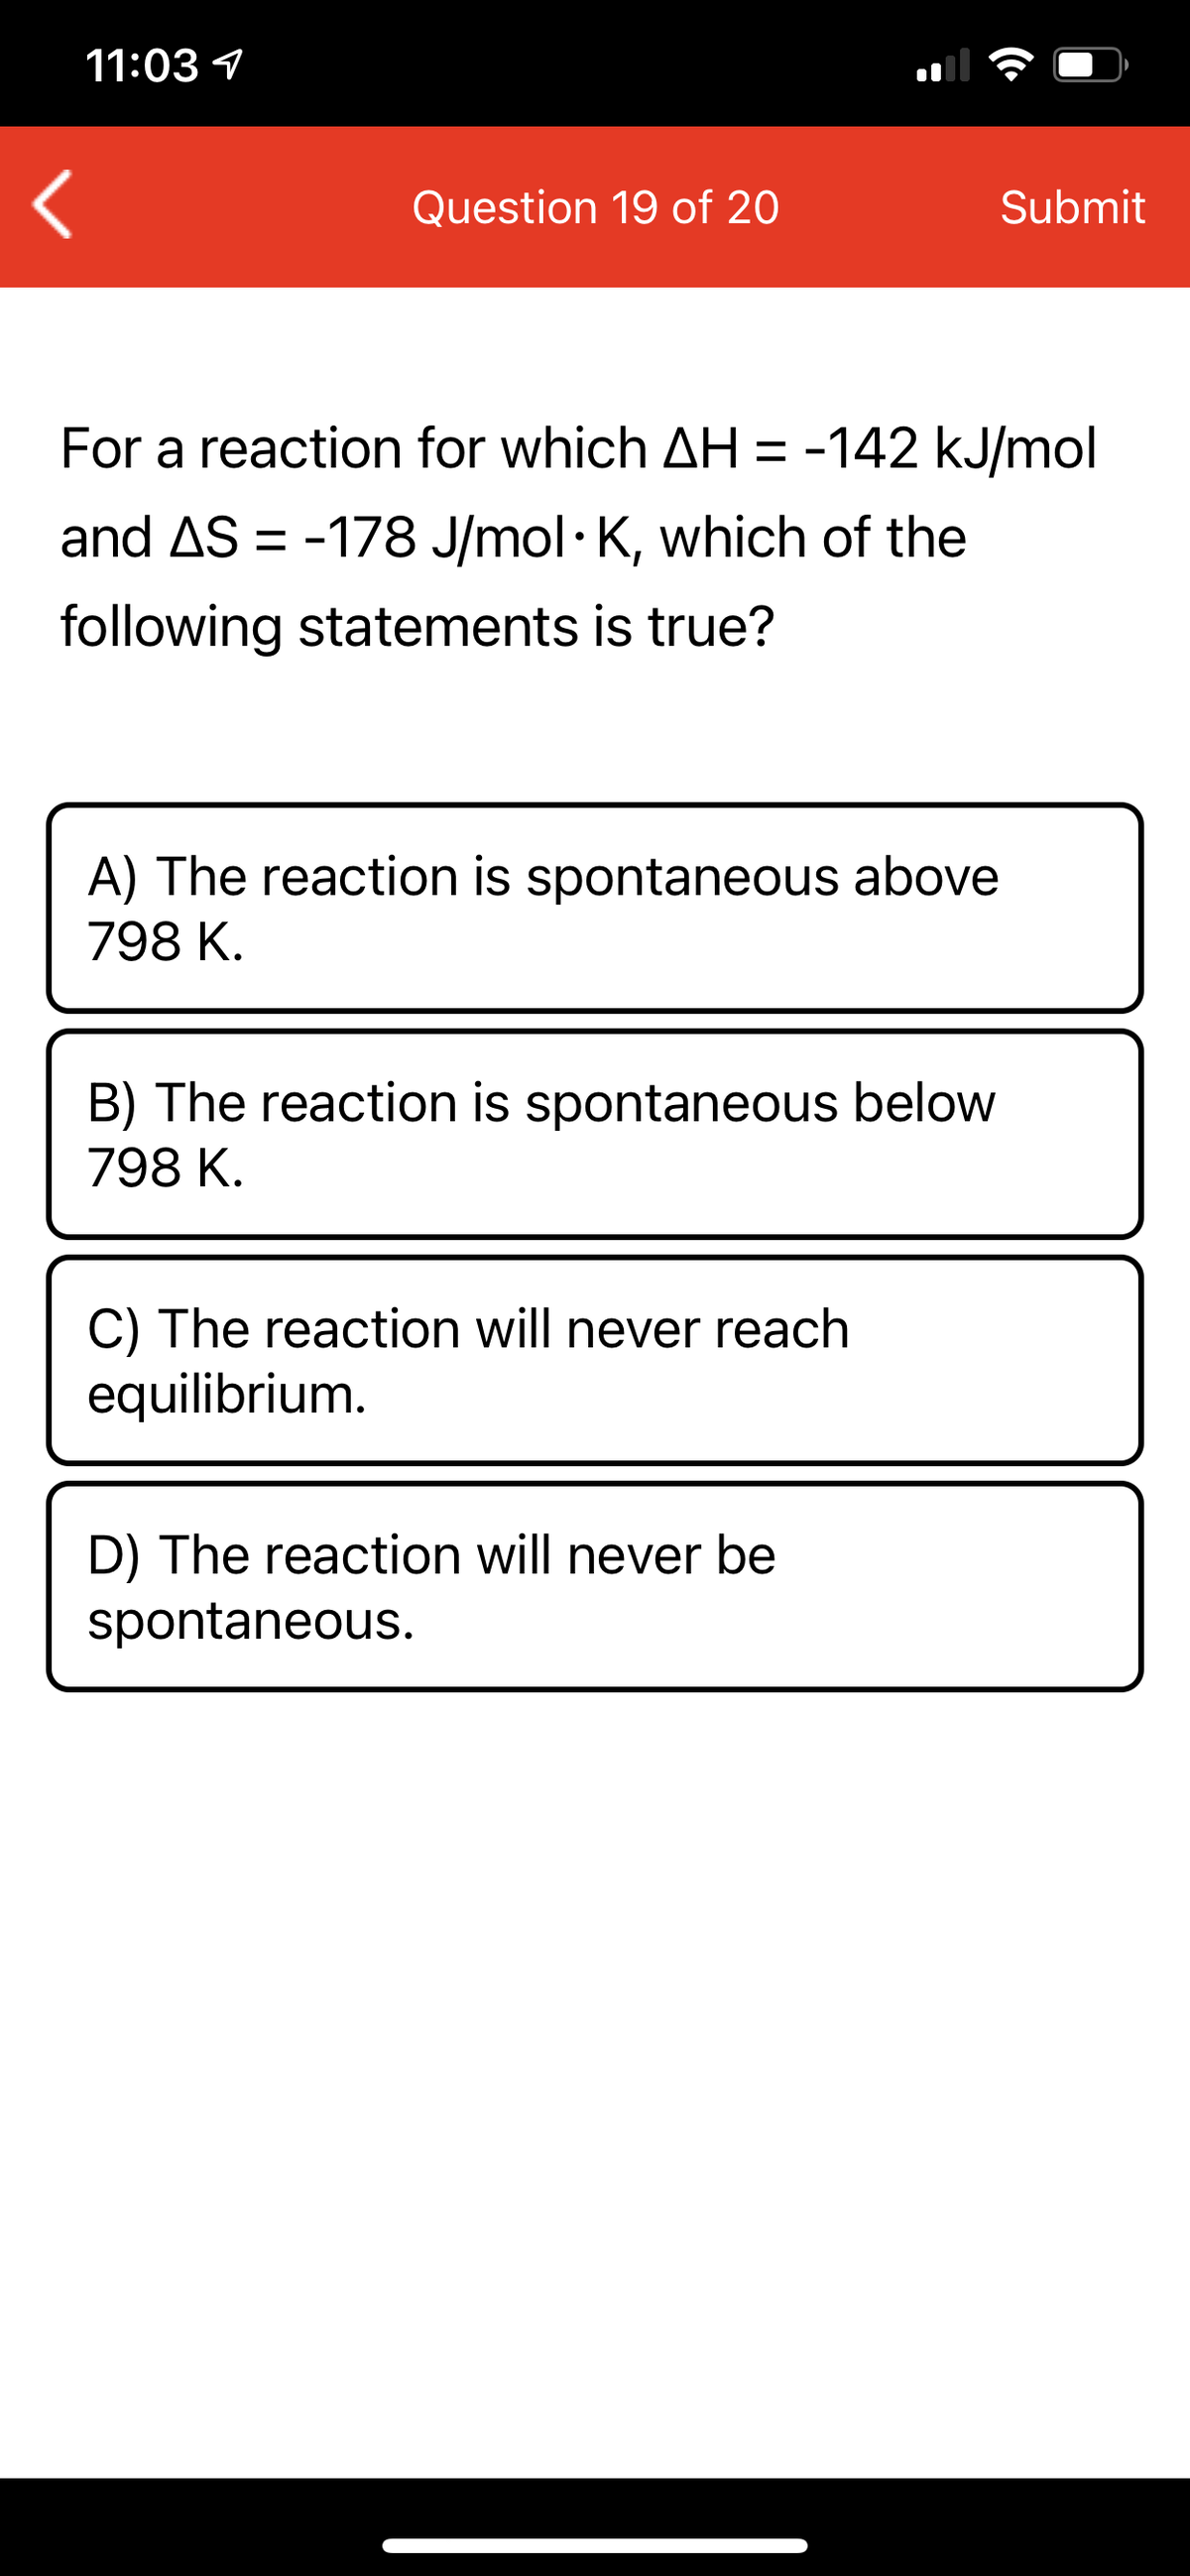 11:03 1
Question 19 of 20
Submit
For a reaction for which AH = -142 kJ/mol
and AS = -178 J/mol· K, which of the
following statements is true?
A) The reaction is spontaneous above
798 K.
B) The reaction is spontaneous below
798 K.
C) The reaction will never reach
equilibrium.
D) The reaction will never be
spontaneous.
